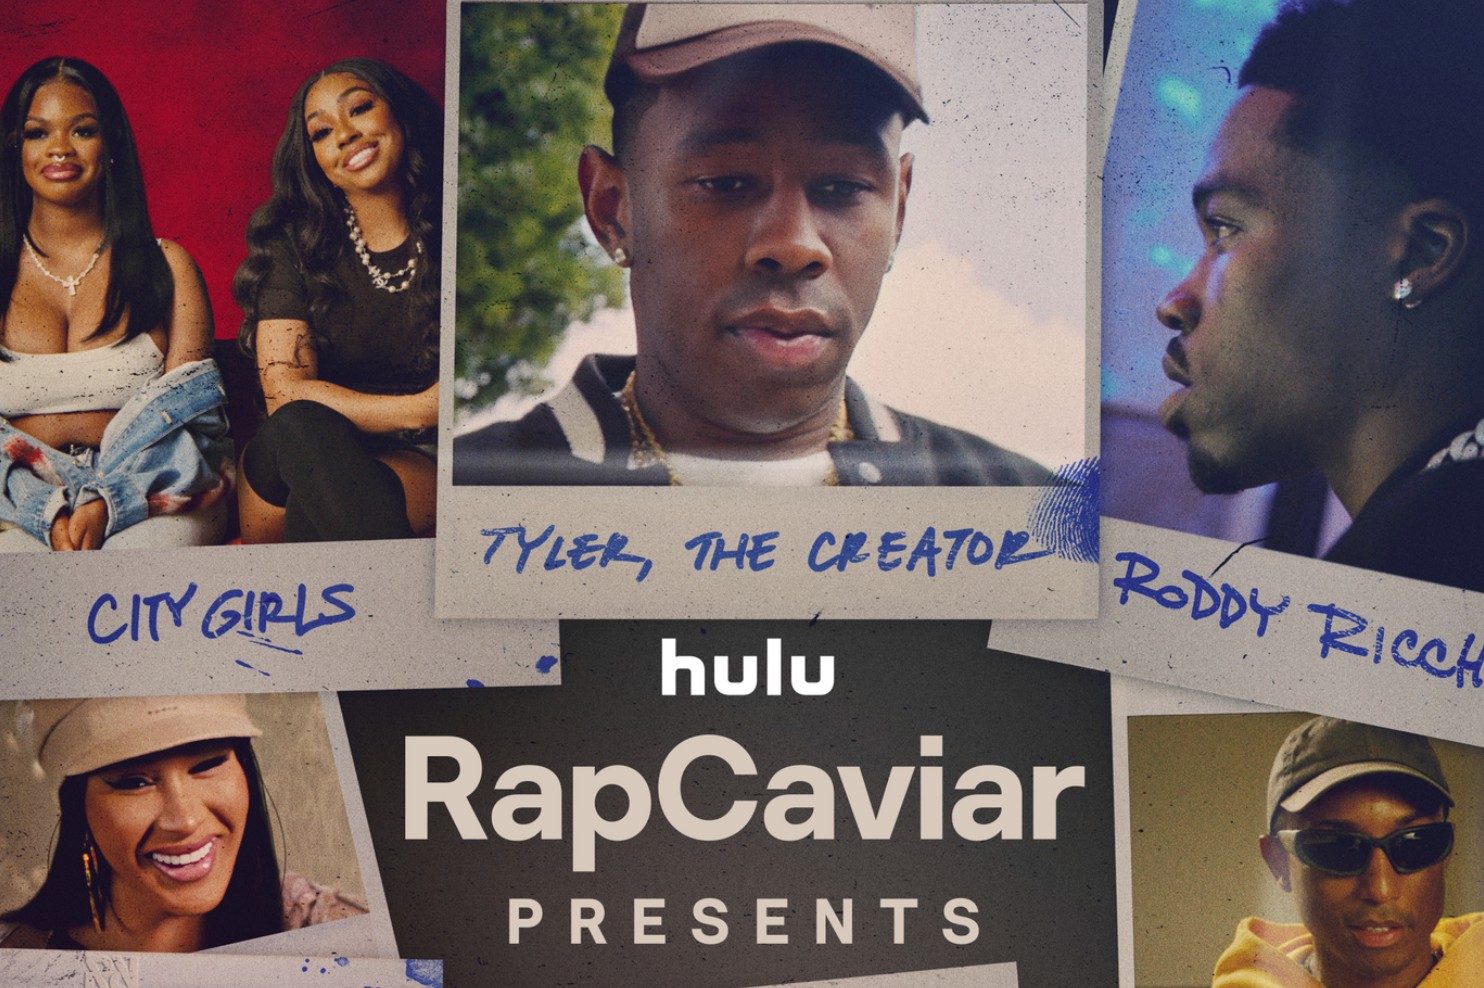 House music — good music that could buy you a house” From the Rap Caviar  Tyler, the Creator documentary 🎥